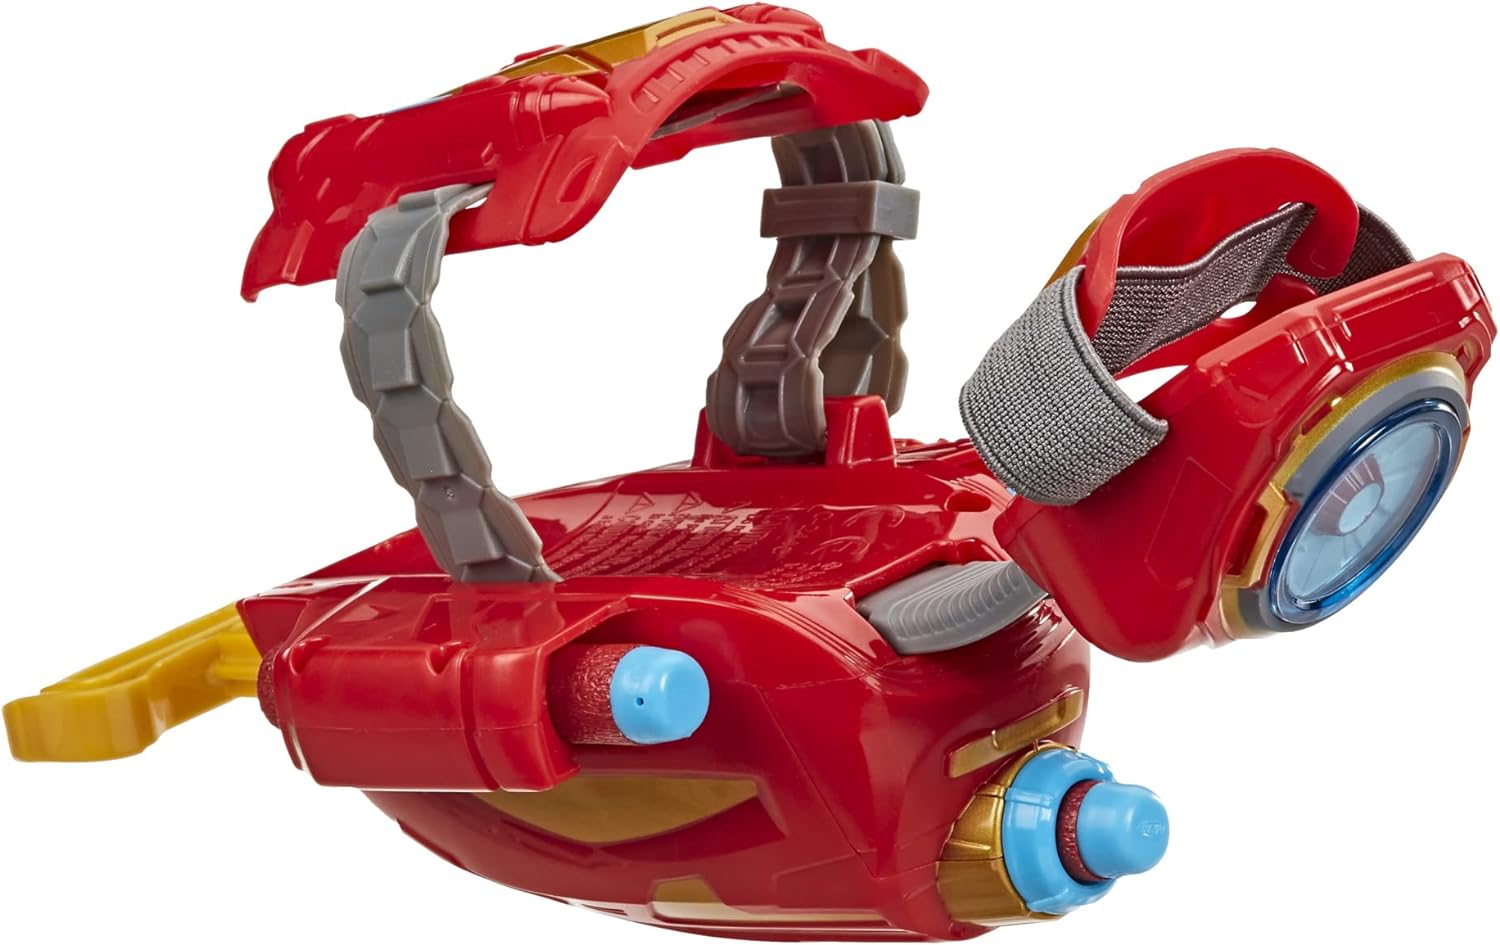 Marvel Nerf Power Moves Avengers Iron Man Repulsor Blast Gauntlet Dart-Launching Toy , Roleplay, Toys for Kids Ages 5 and Up (Amazon Exclusive)